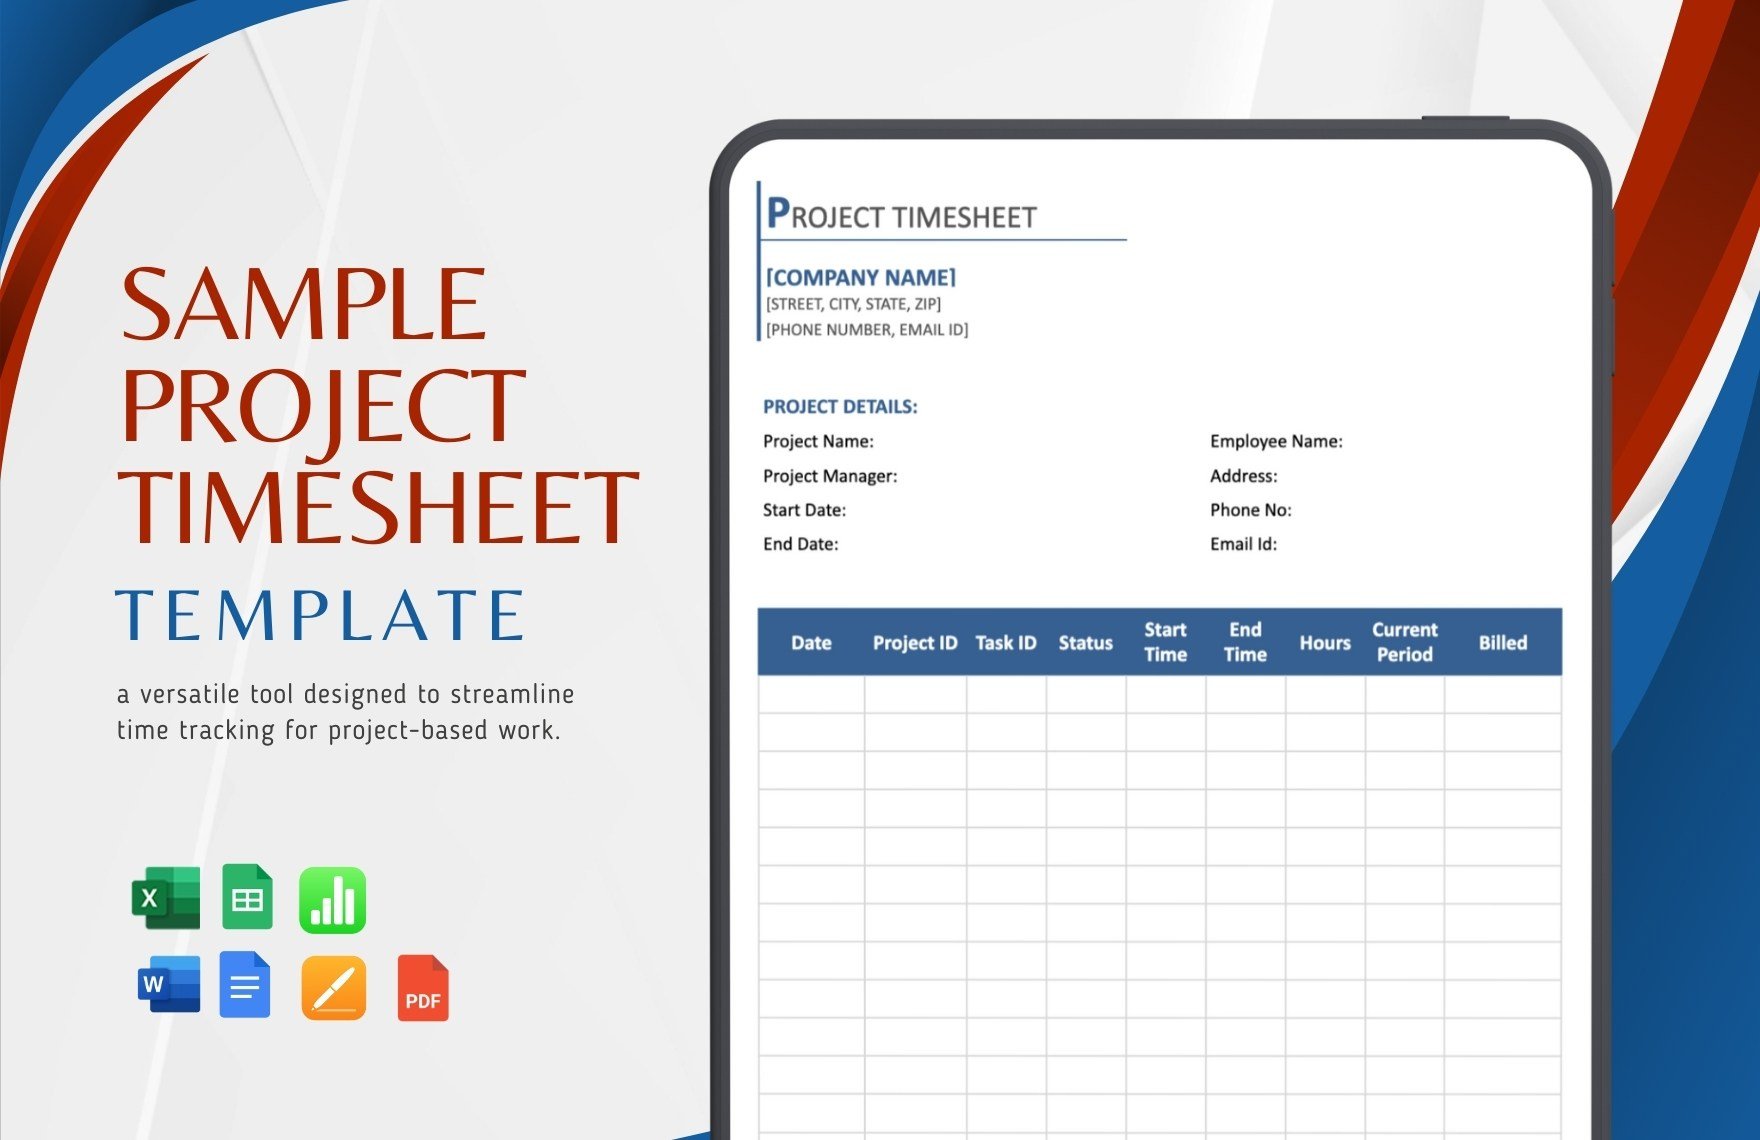 Sample Project Timesheet Template in Word, Google Docs, Excel, PDF, Google Sheets, Apple Pages, Apple Numbers